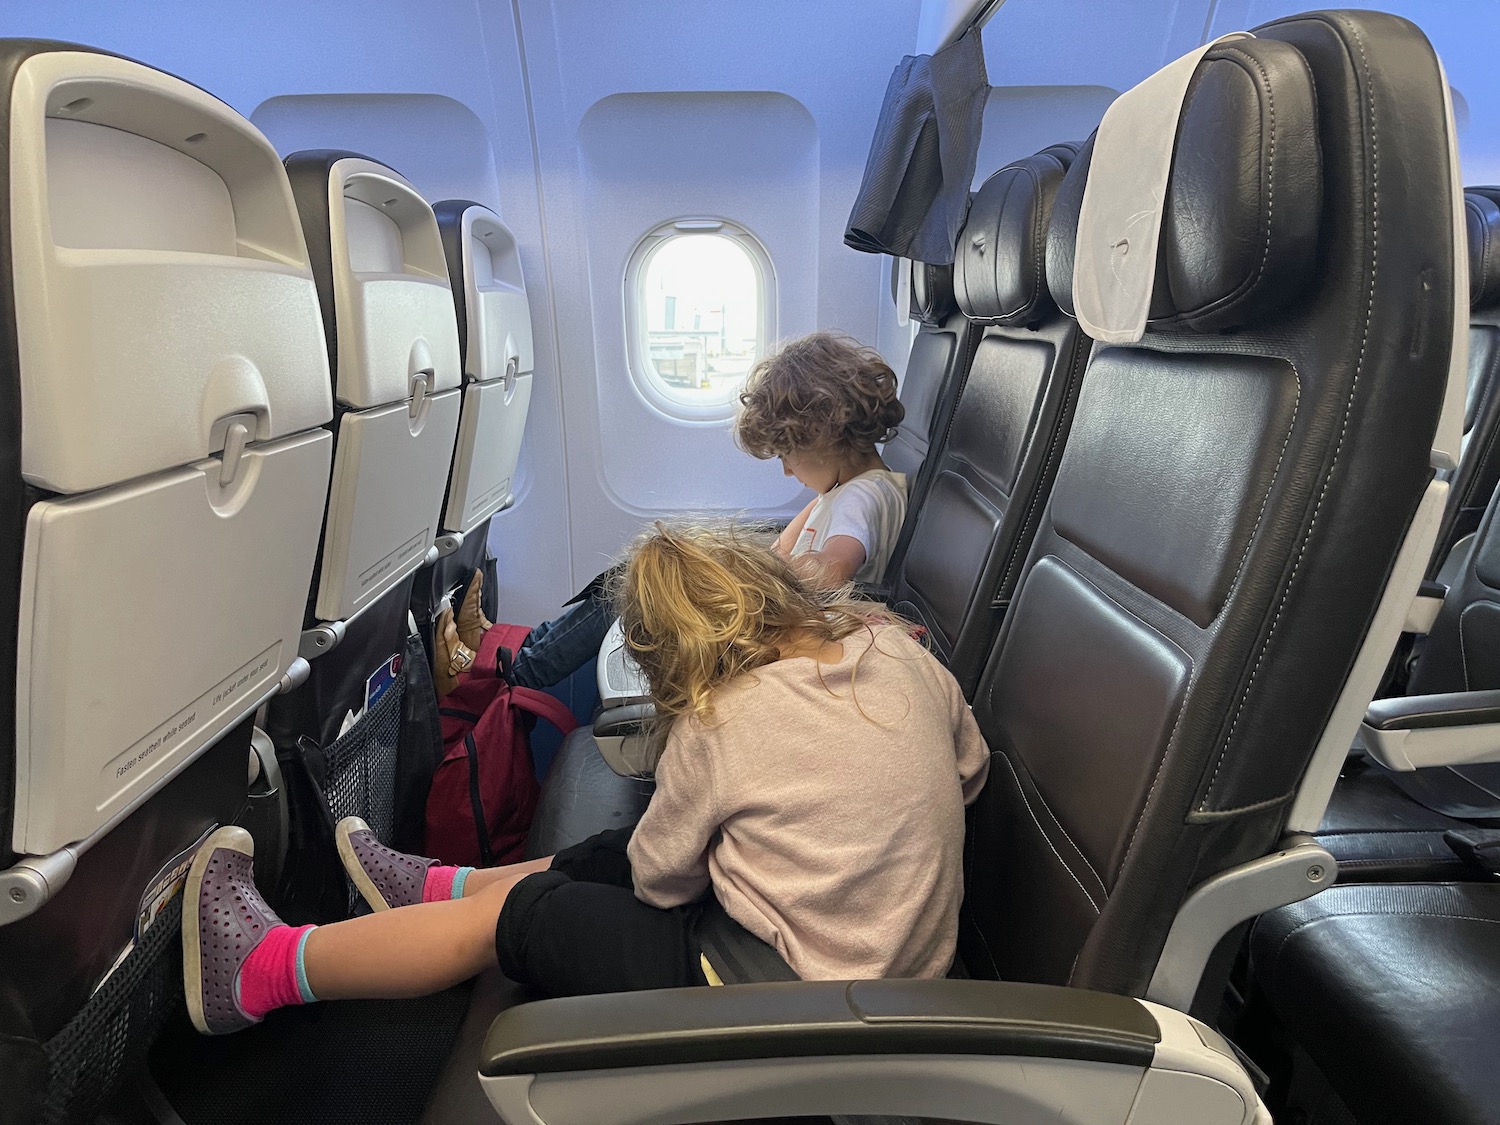 two children sitting in an airplane